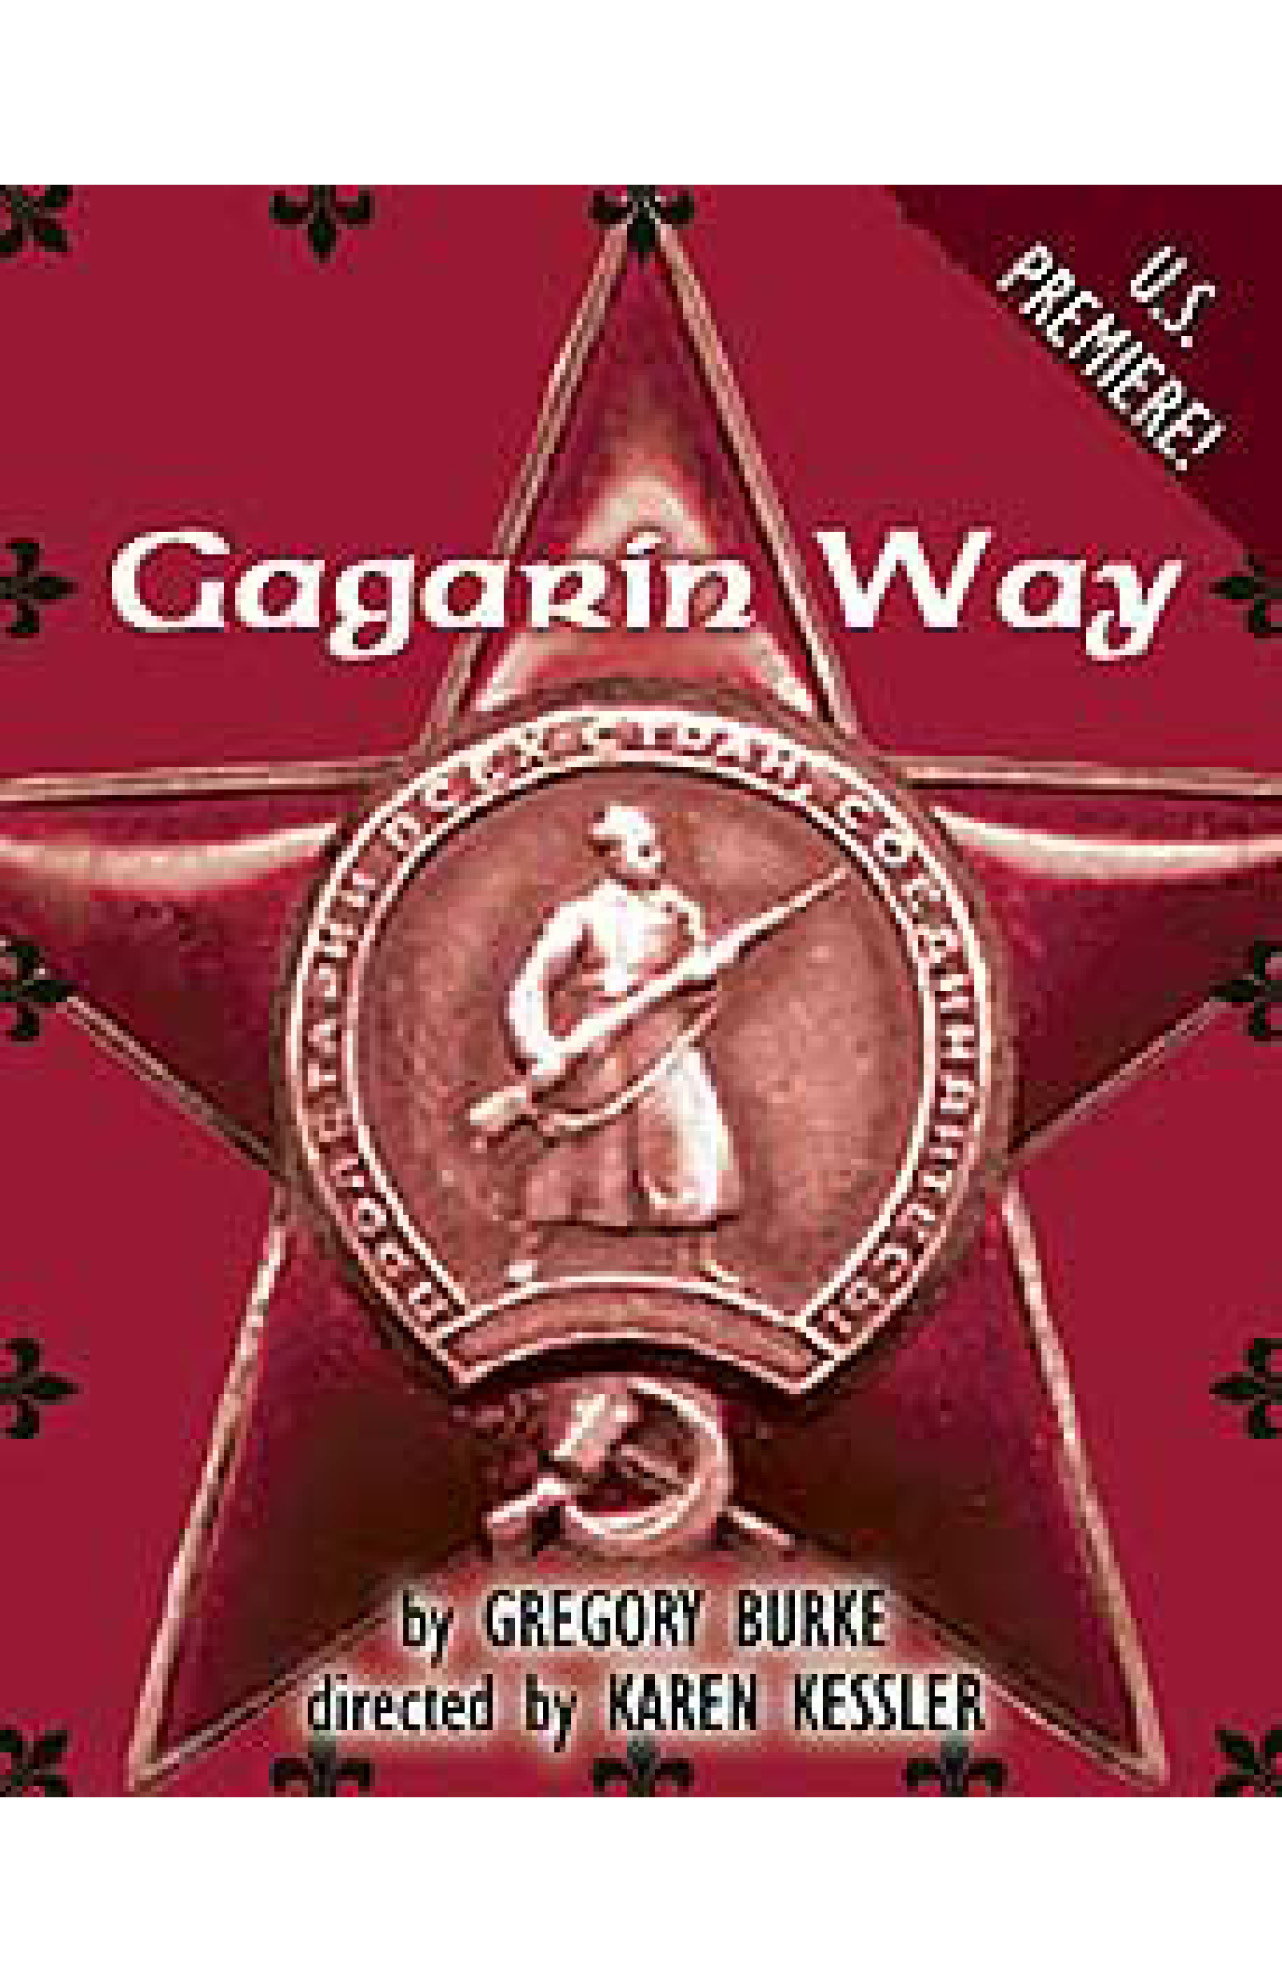 U.S. Premiere
Set in a small, dead-end town on the southeast coast of Scotland, Gagarin Way concerns the vindication of two thoroughly disenfranchised employees of a soulless computer factory, owned by a large multi-national corporation. Always uncertain of their job security and constantly spied on by corporate snoops, Eddie and Gary plot their revenge and invite Tom, a young security guard fresh out of university, to help them pull off a late night “heist” in a dark storeroom far from the factory floor. But when it’s revealed that the stolen goods consist of more than a few crates of microchips to be sold on the black market, Tom starts to wish he hadn’t left his post. Fueled by the indignation of the nameless and faceless plebes across the globe that make all the useless paraphernalia we build our lives around, Gagarin Way crackles with gallows humor and ballistic intensity.